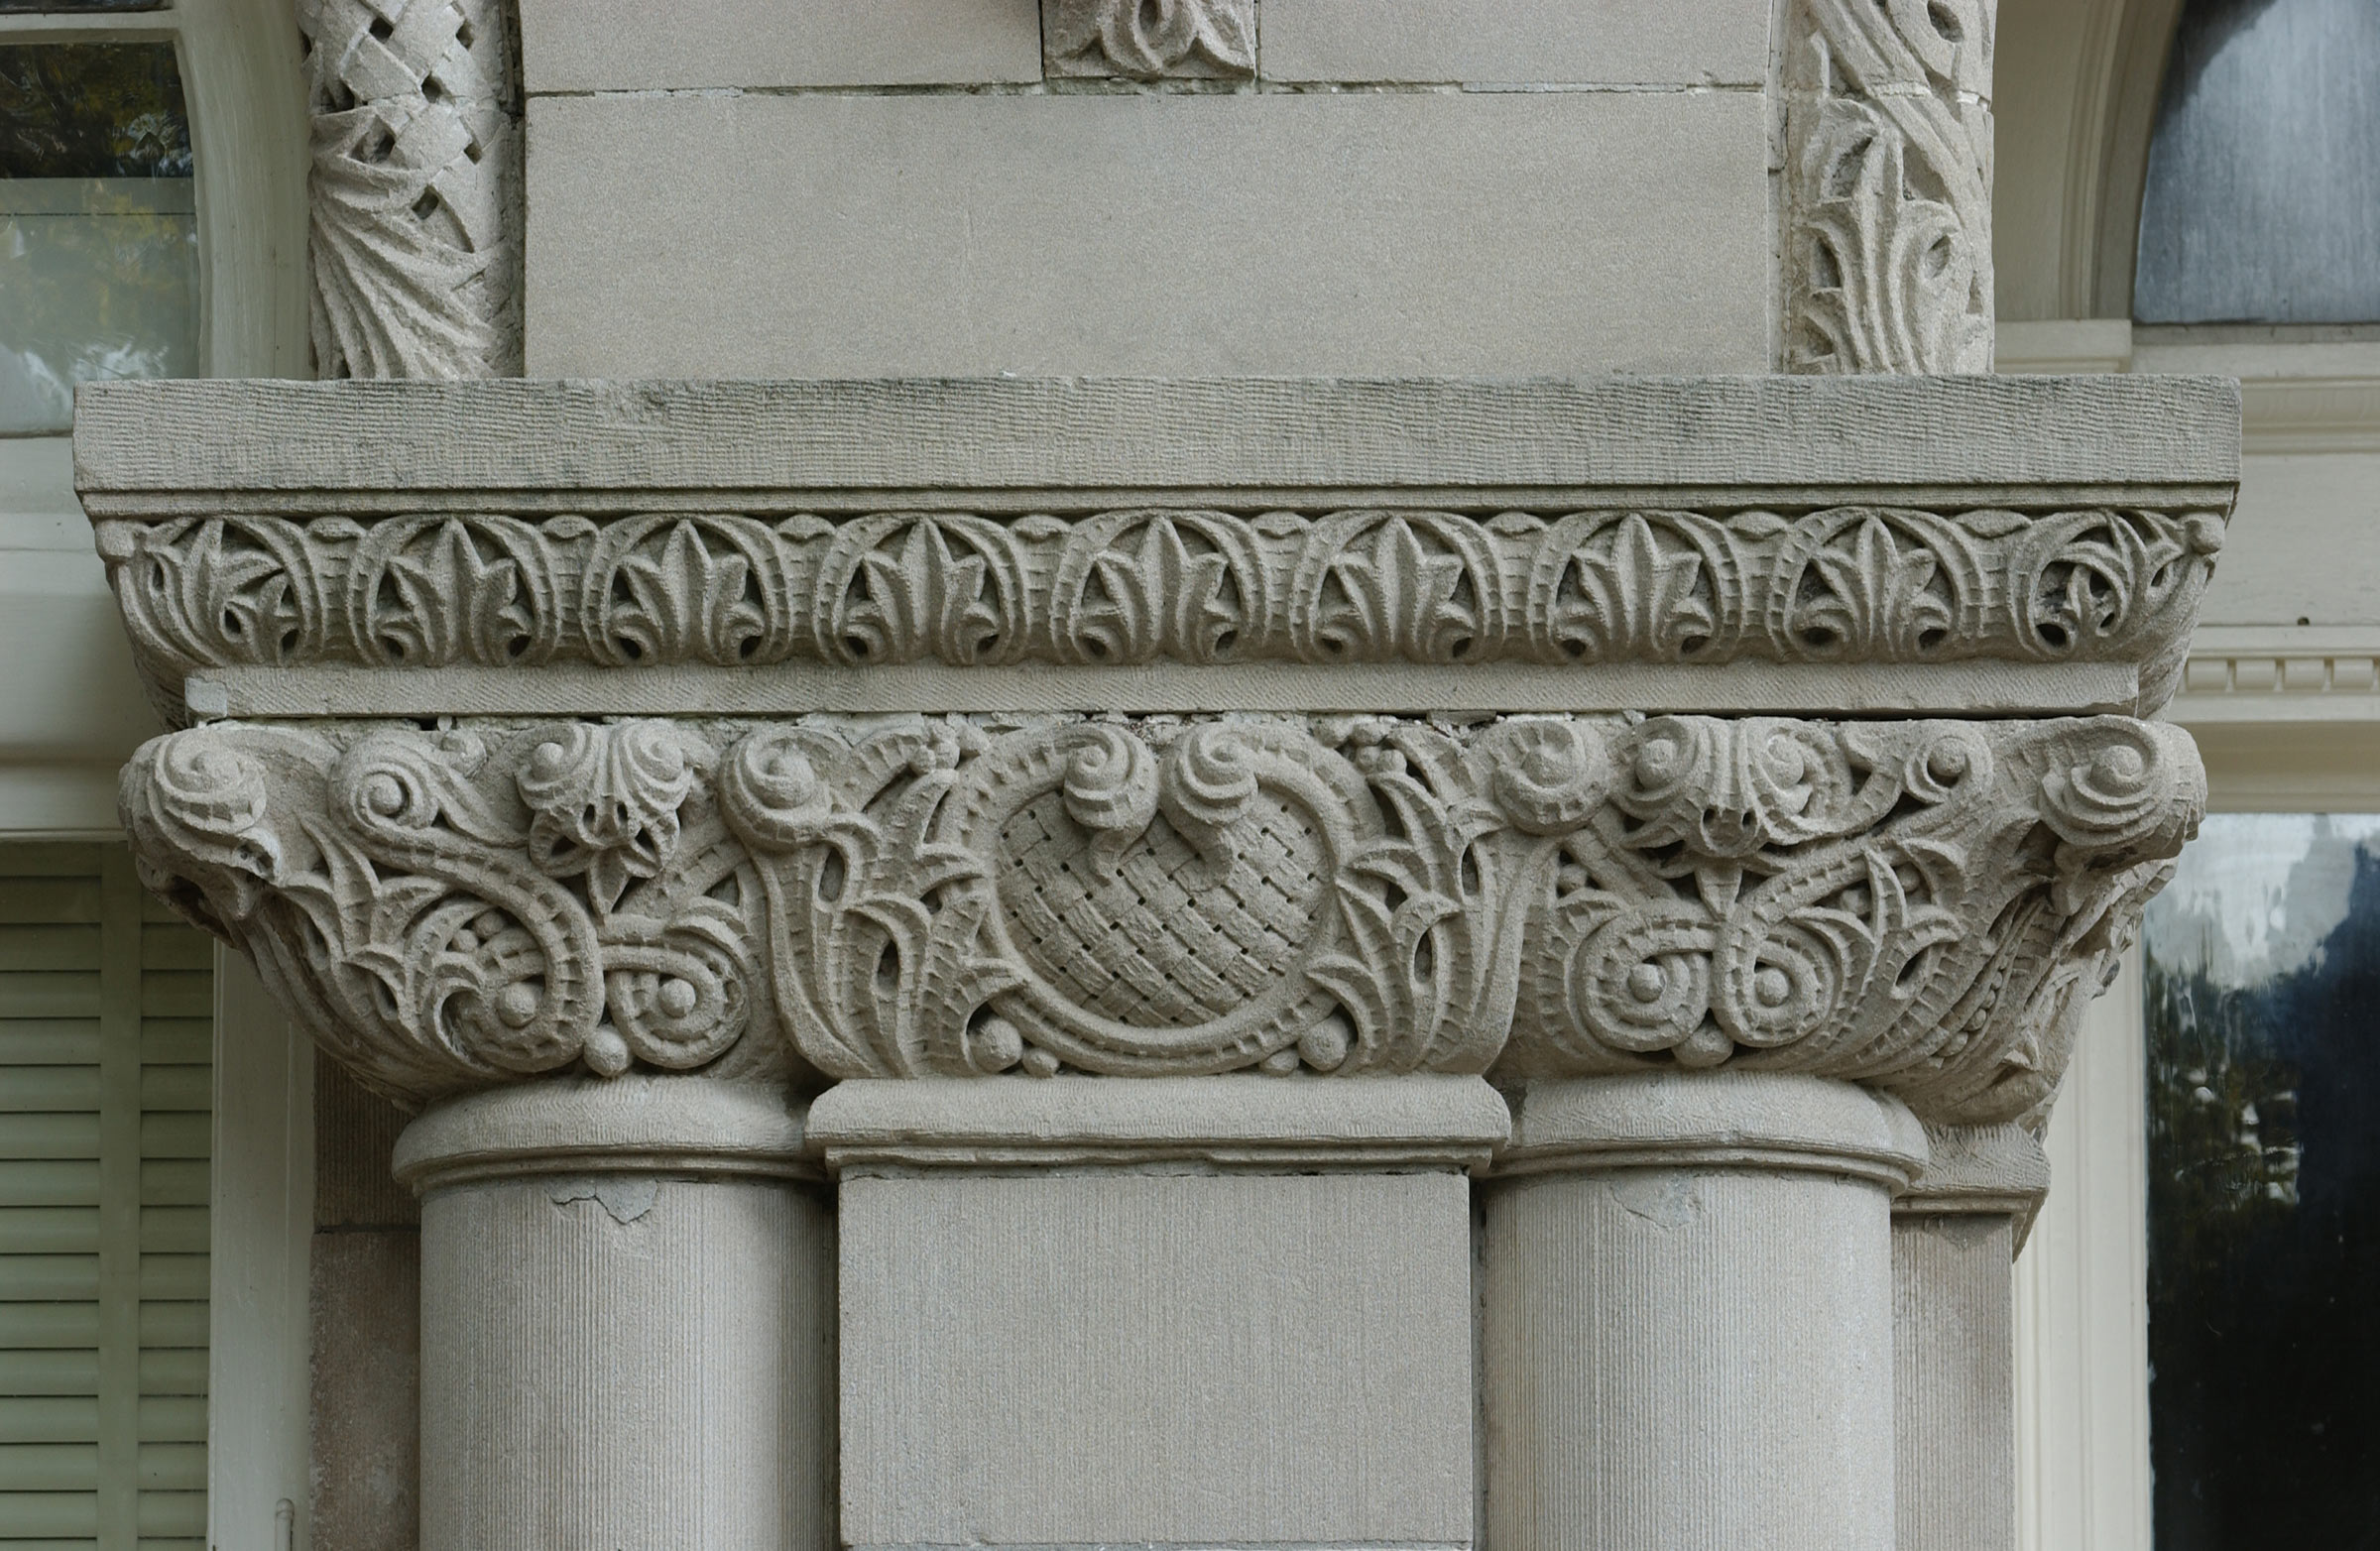 Close-up Photo of Column on Tulane University's Campus - The Murphy Institute